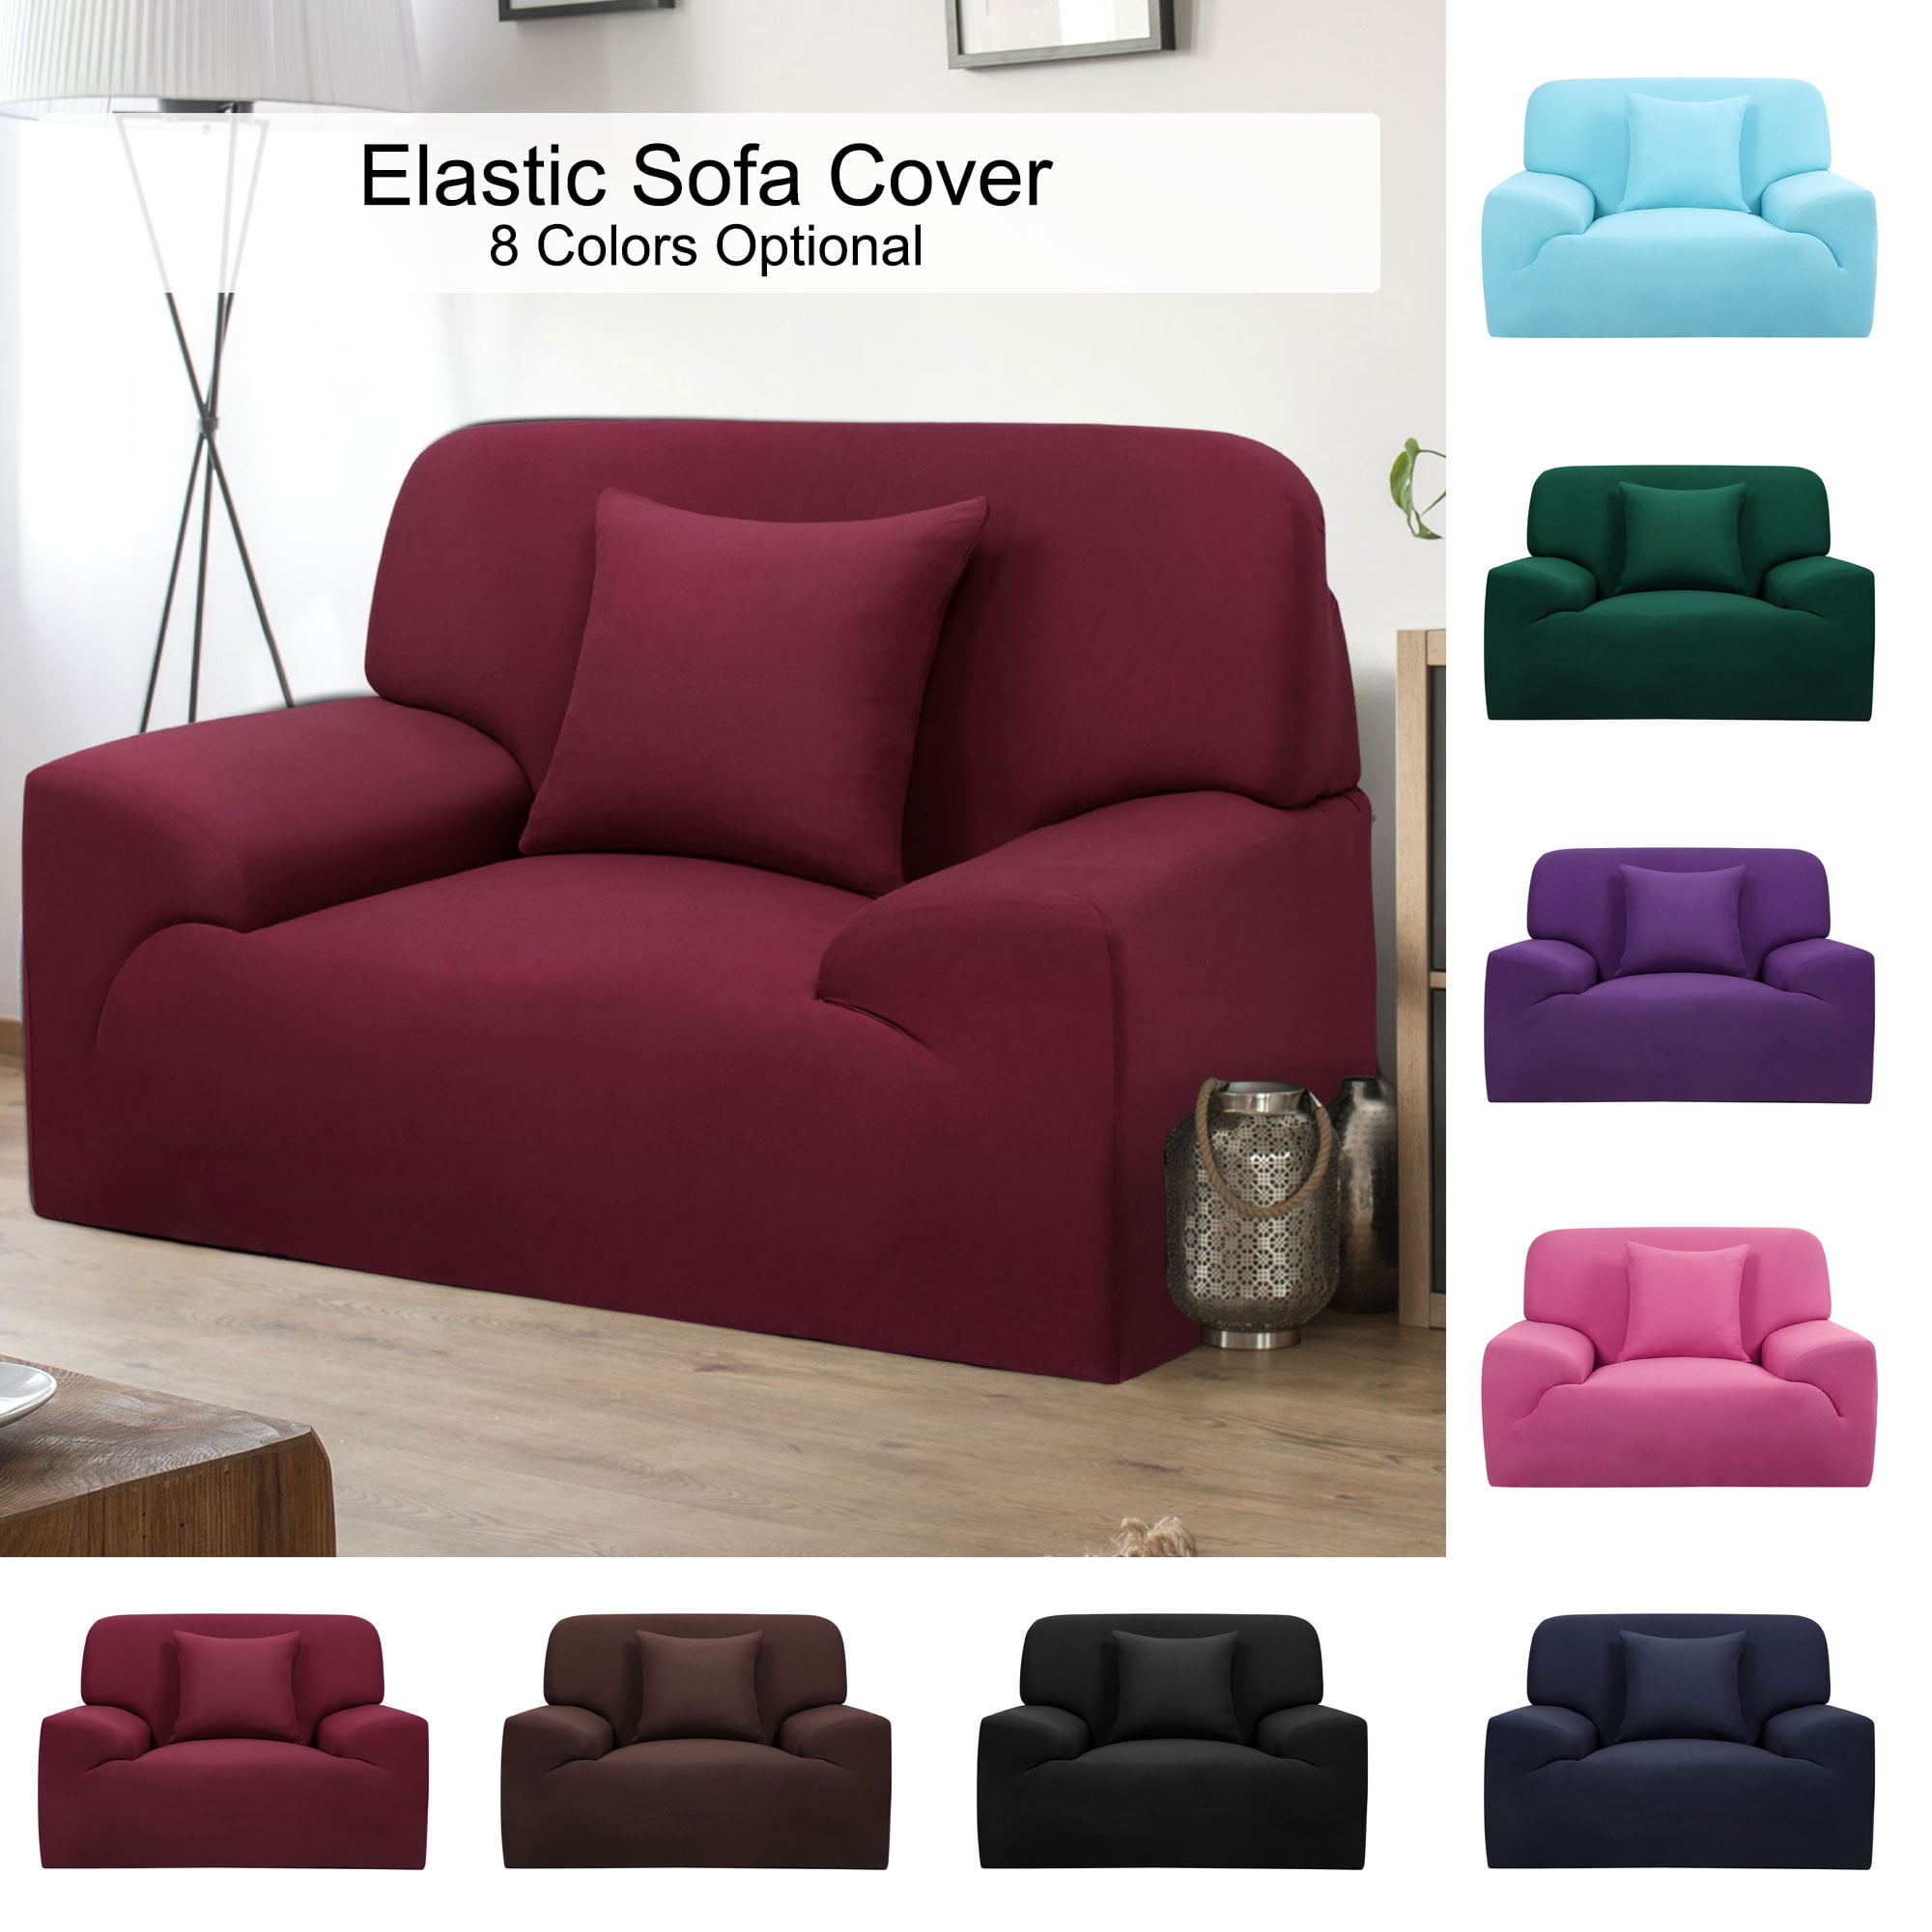 1/2/3/4 Seater Stretch Sofa Cover Elastic Lounge Chair Couch Easy Fit Slipcover